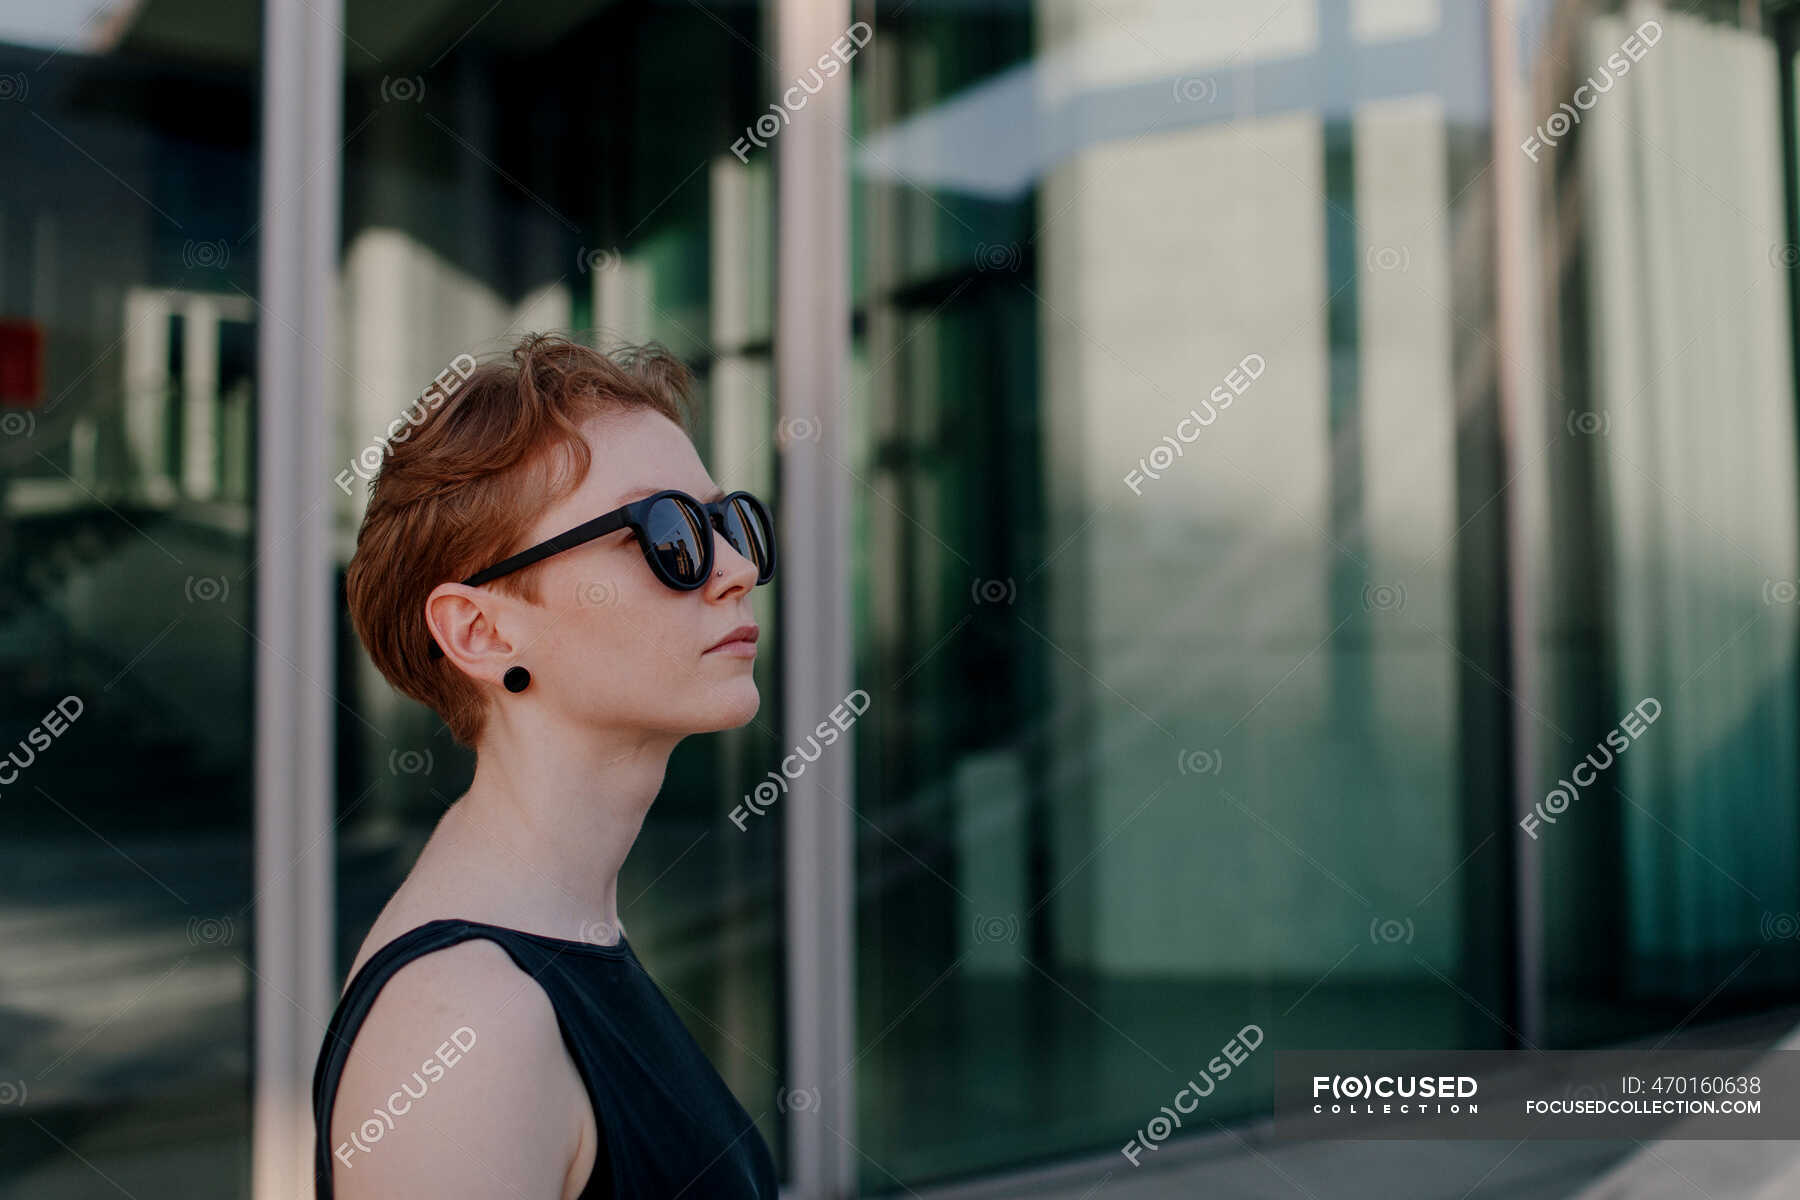 Elegant Red Haired Woman With Sunglasses In The City Portrait